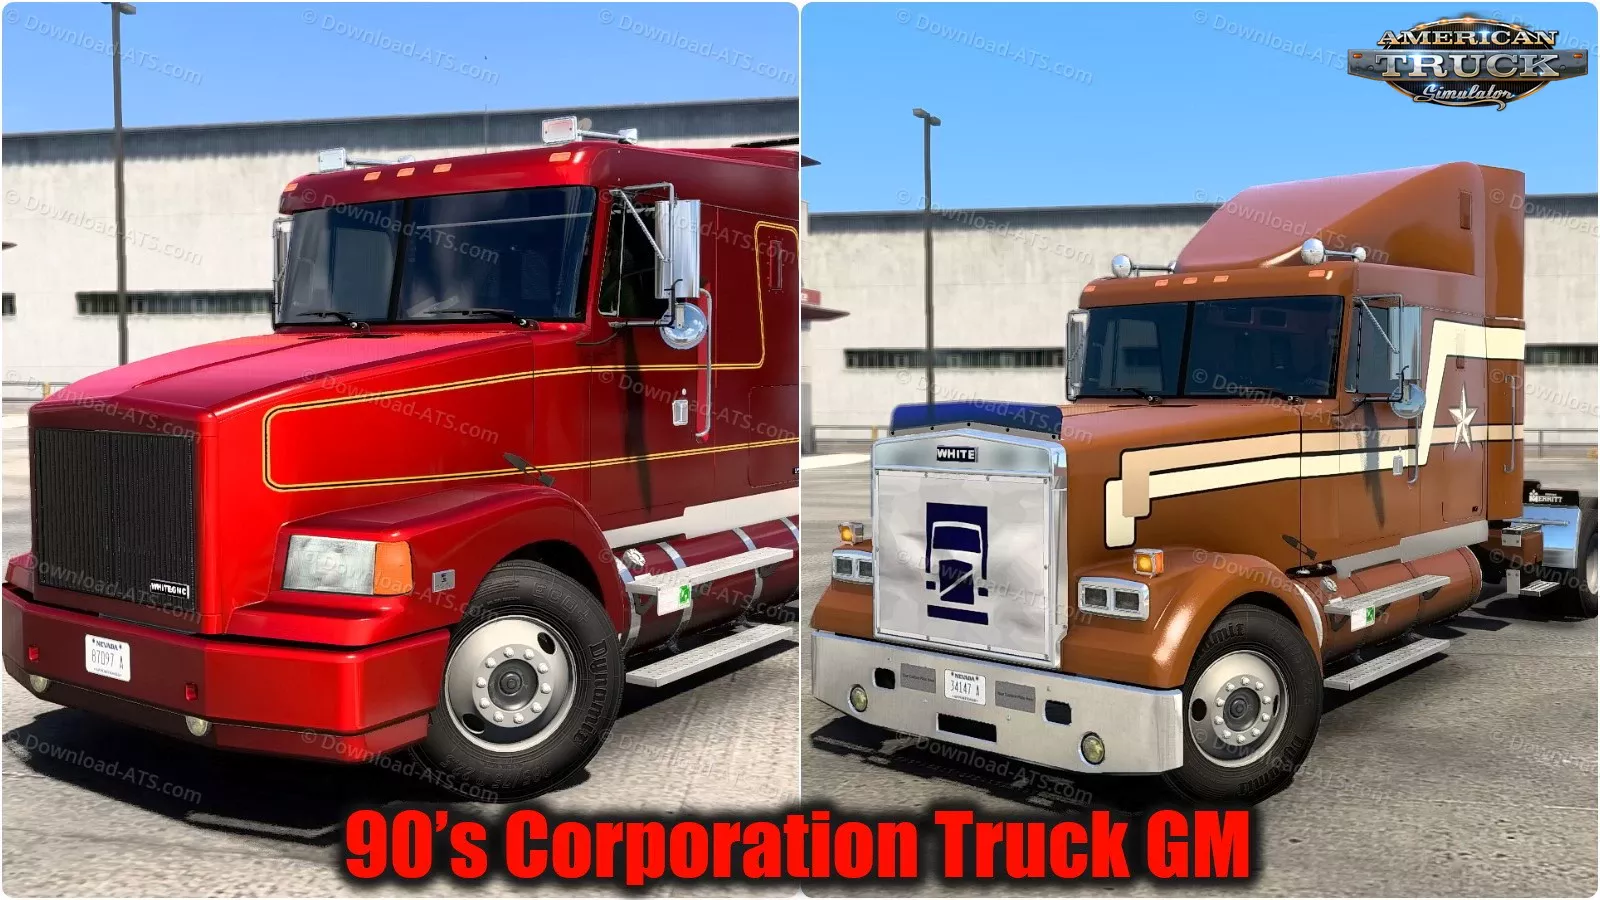 90’s Corporation Truck GM v5.1 (1.50.x) for ATS